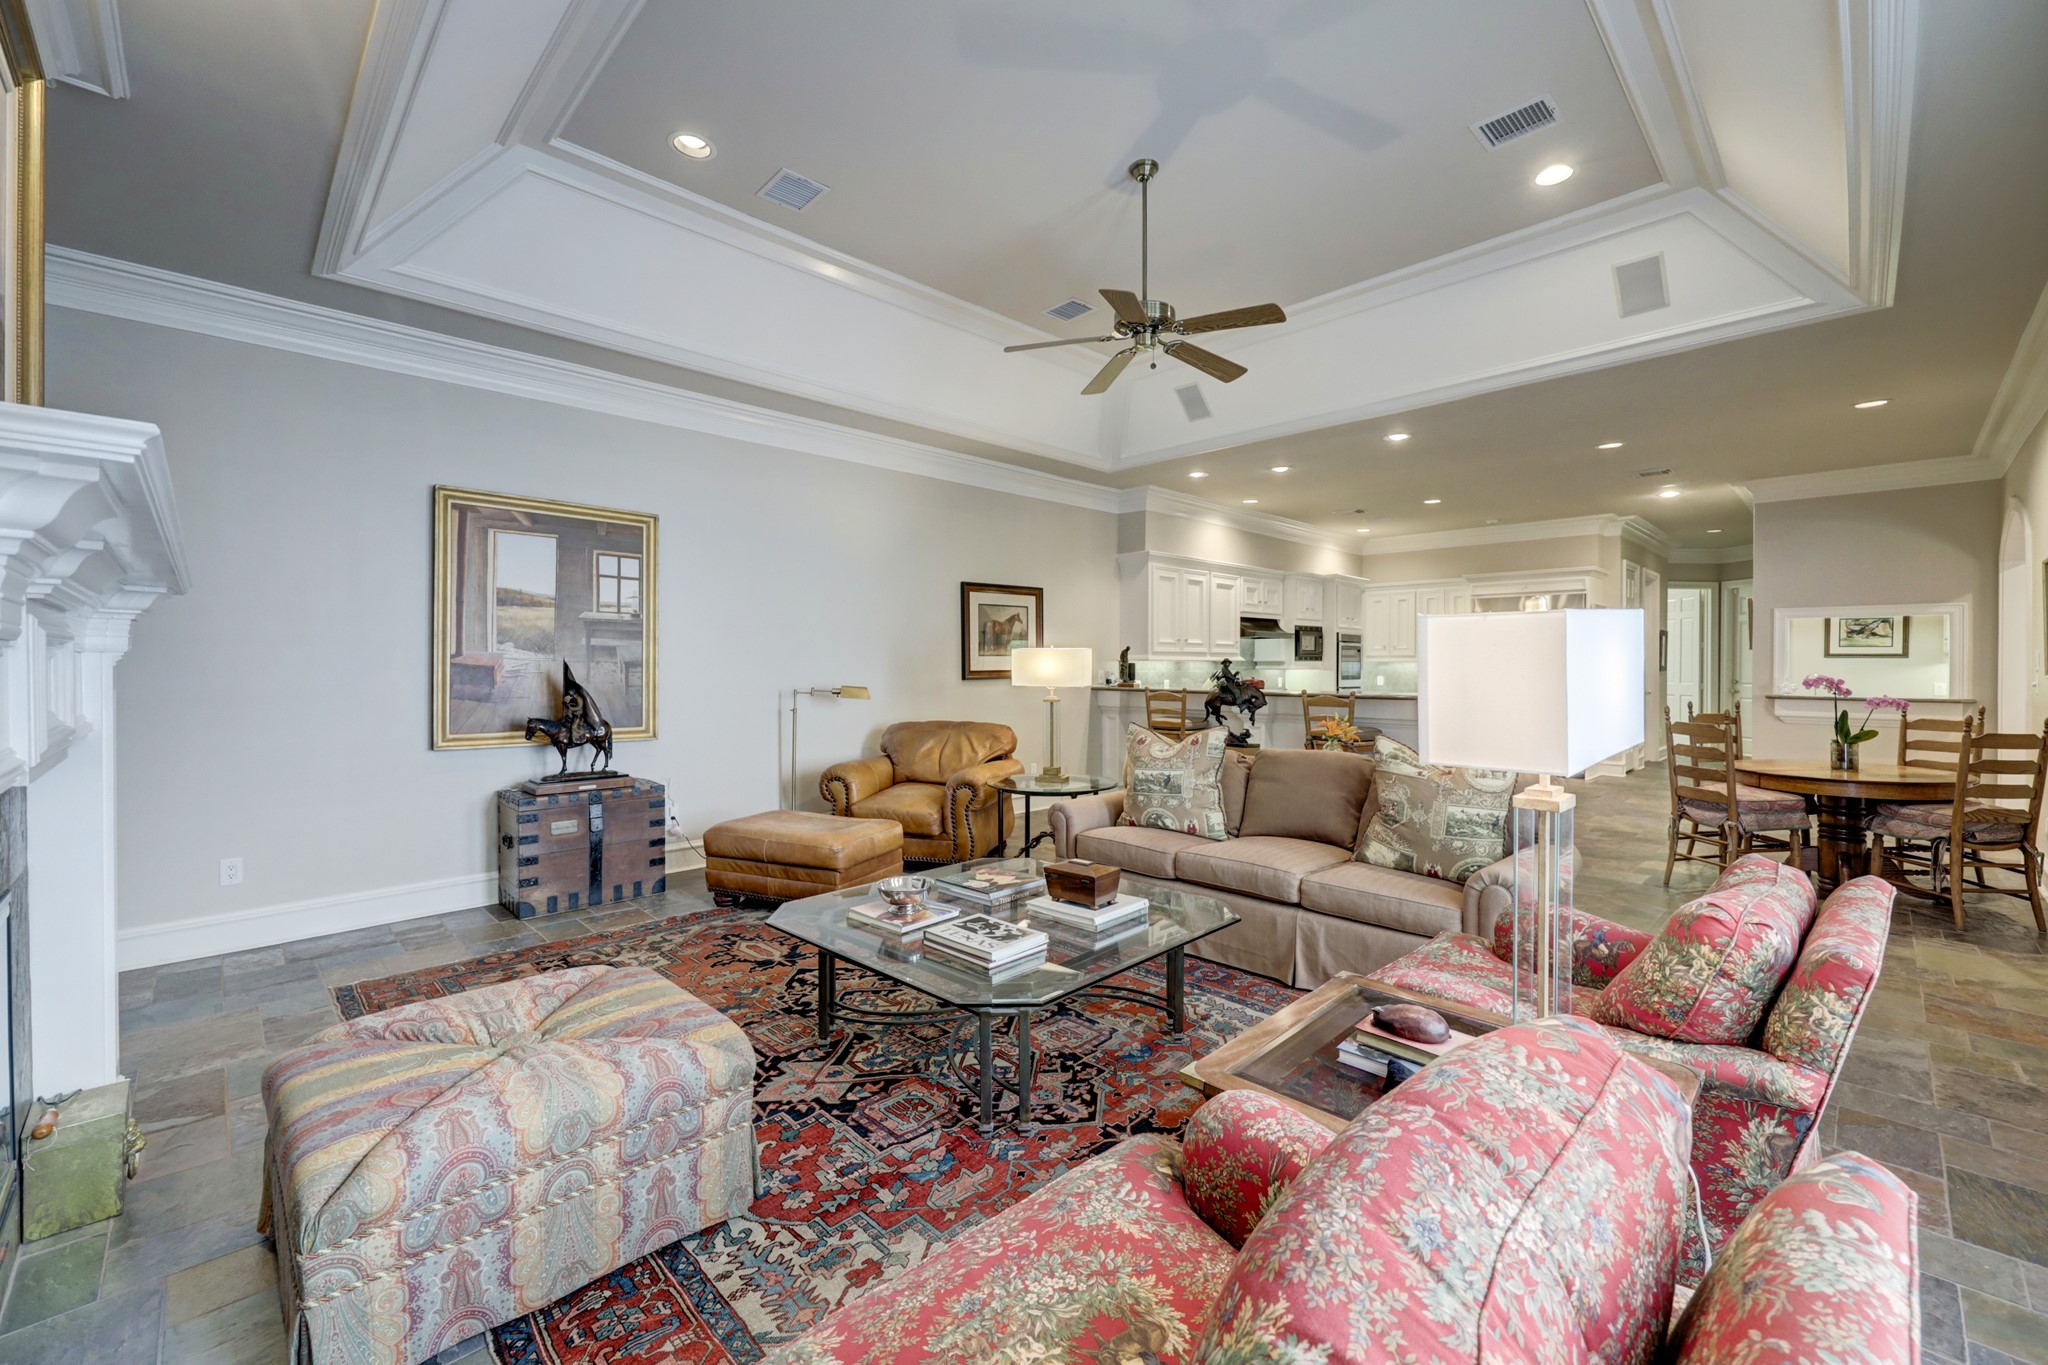 Expansive owner’s suite is located on the second floor through a double door entry and features hardwood floors, soaring vaulted ceiling, gas log fireplace, custom mantle, and bespoke built-ins.
